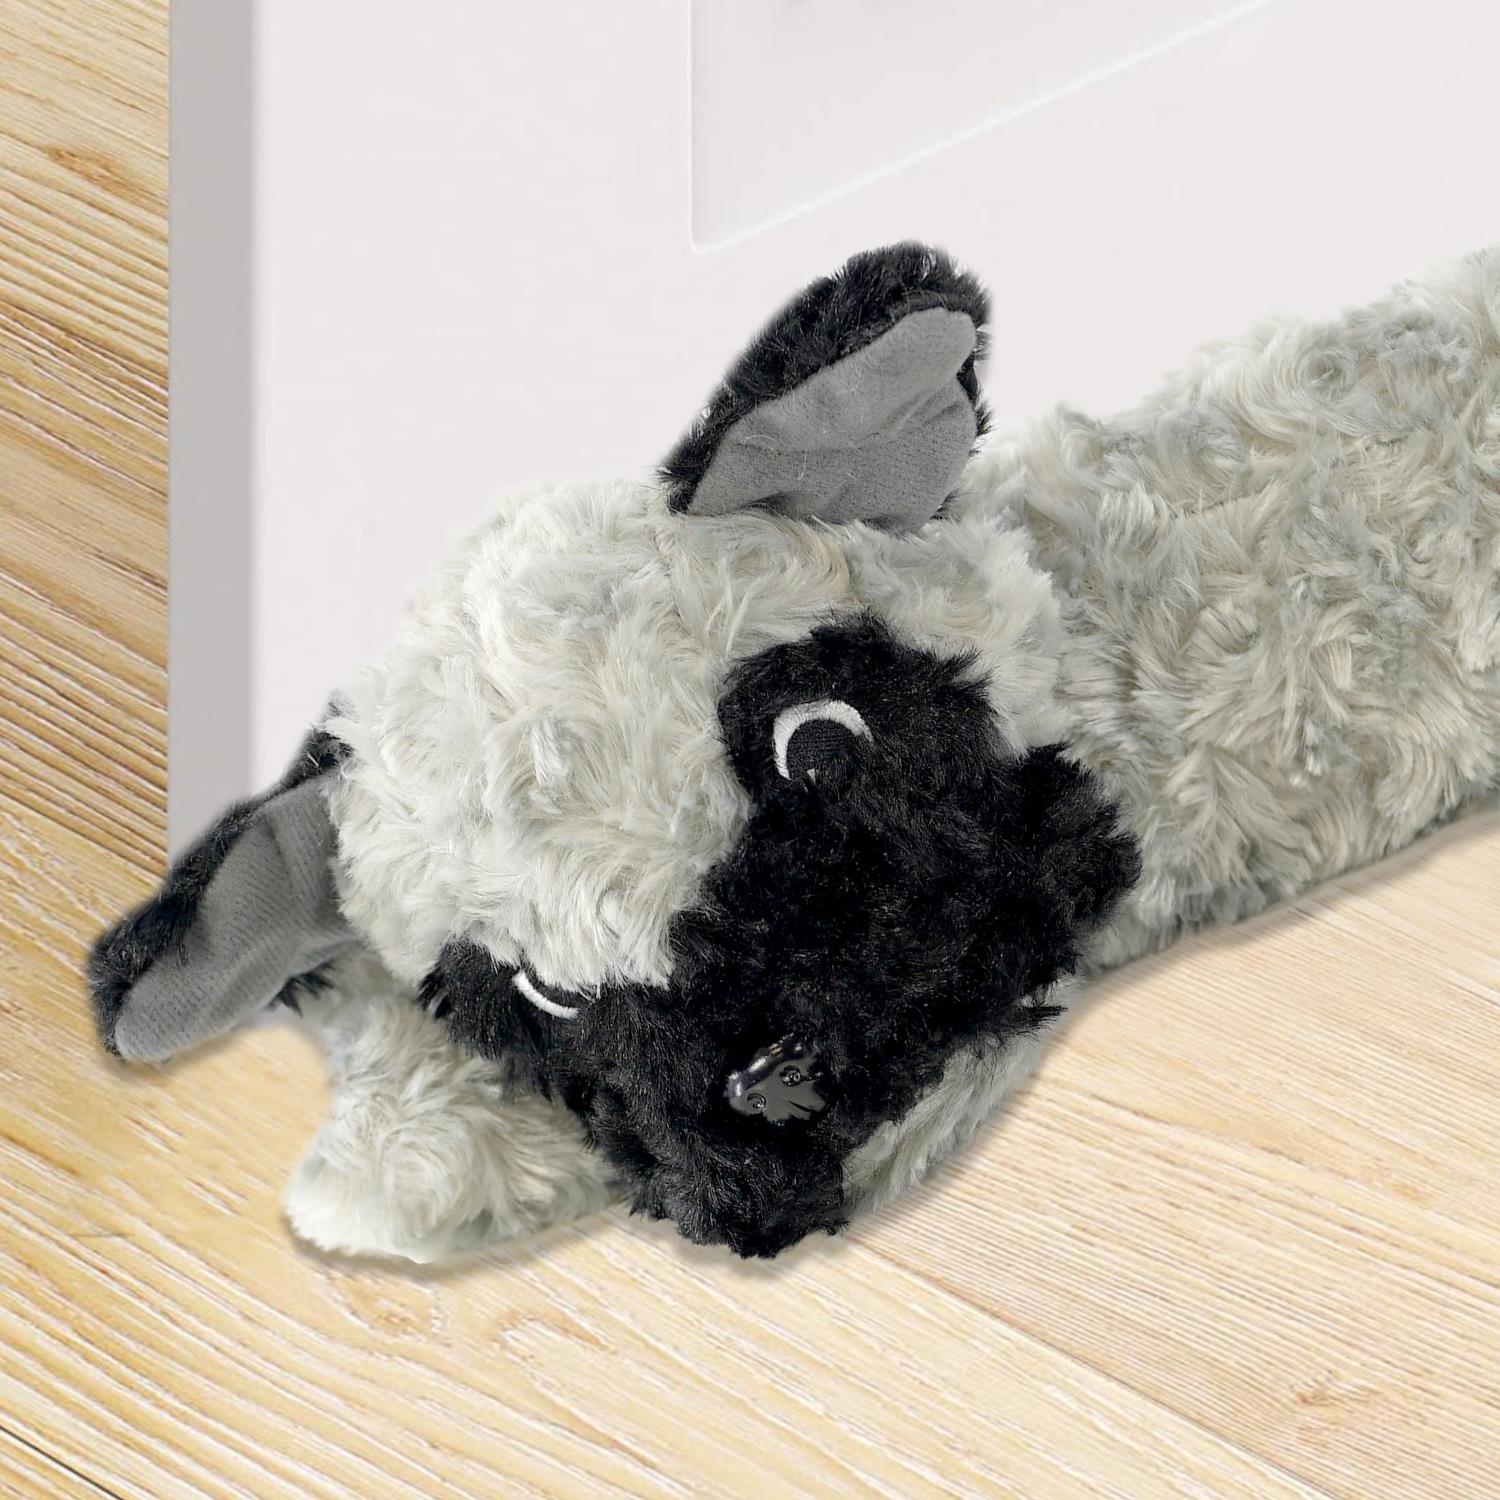 Novelty Grey Dog Excluder by Geezy - The Magic Toy Shop